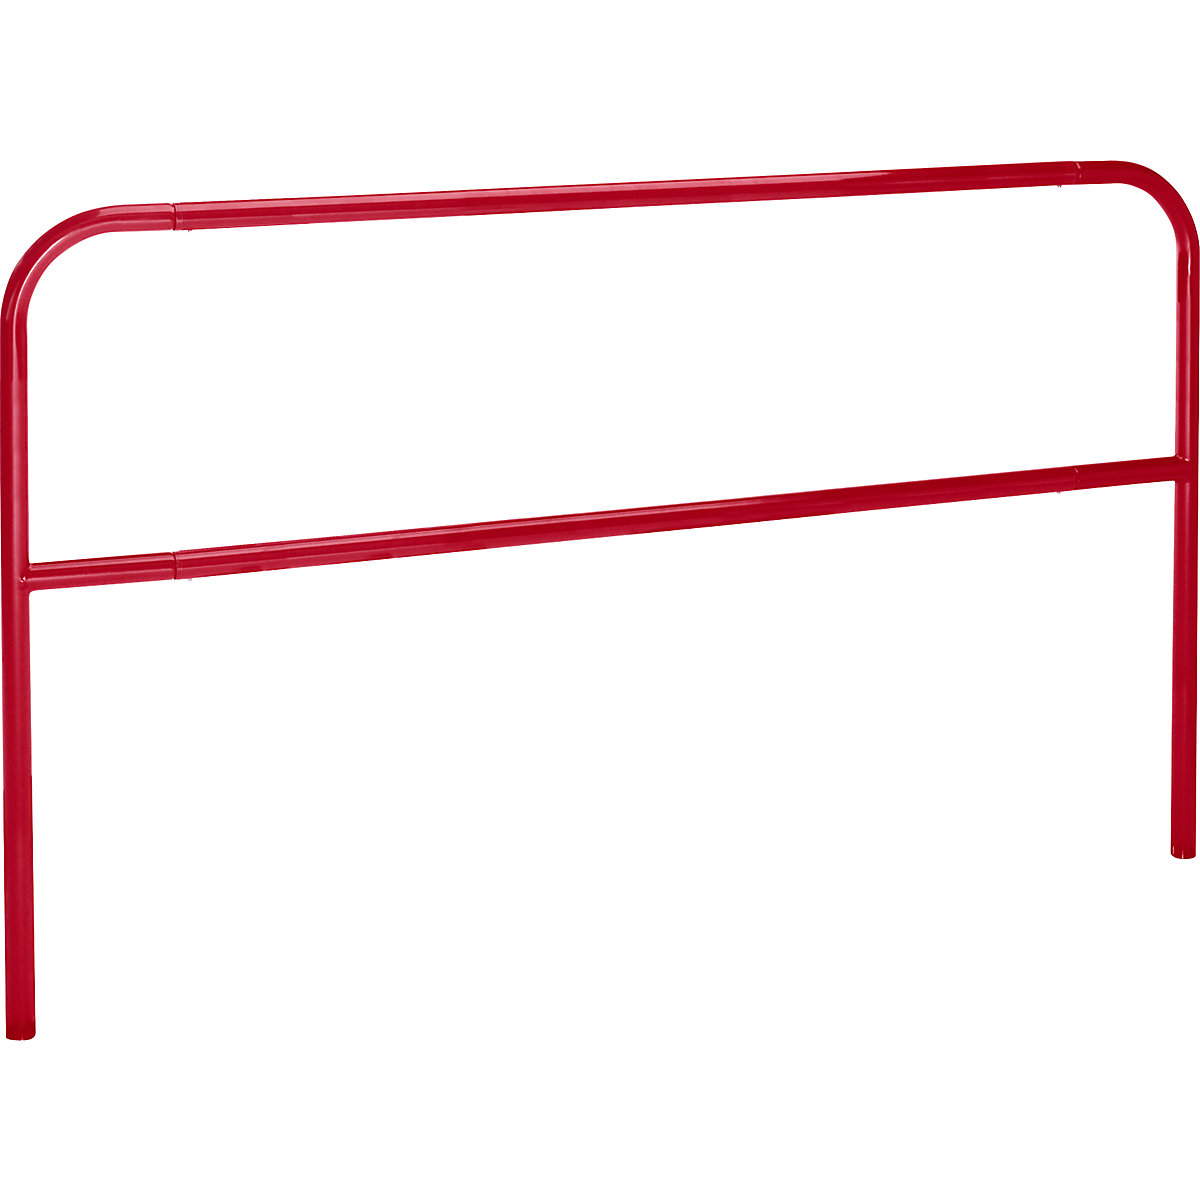 Crash protection bar, for setting in concrete, width 2000 mm, flame red-19